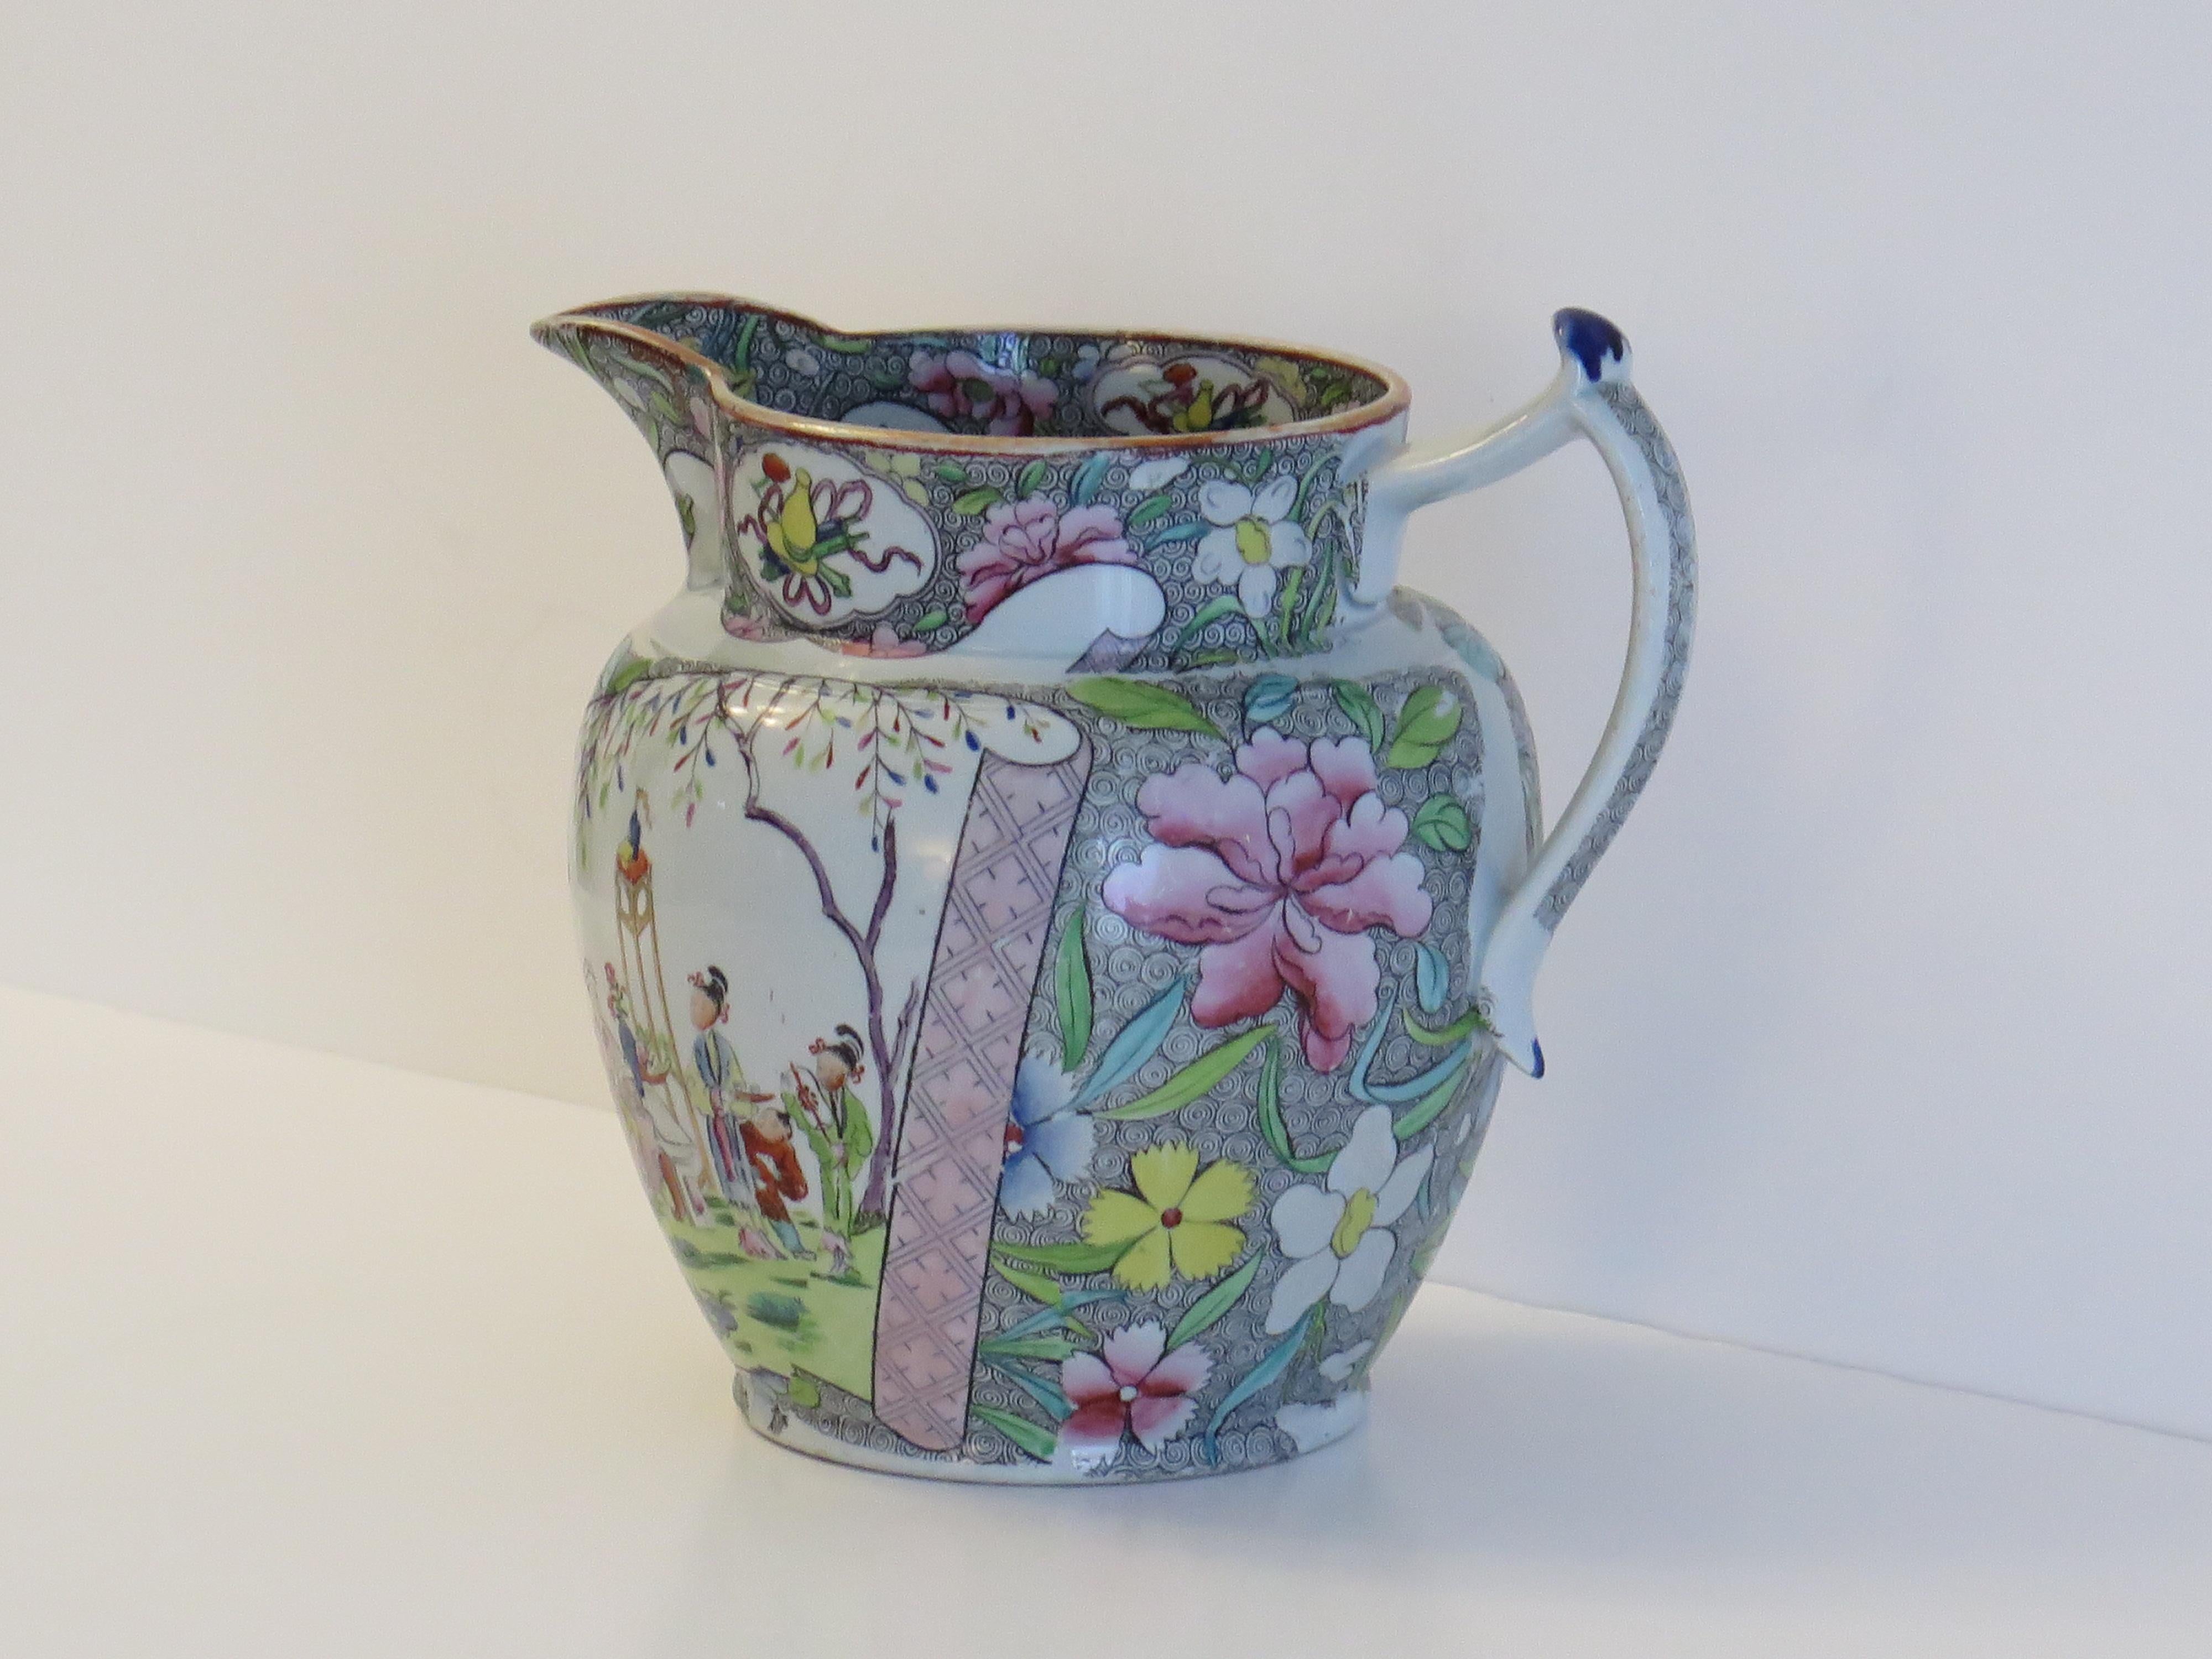 This is an Ironstone pottery, large Jug or Pitcher made by the Mason's factory at Lane Delph, Staffordshire, England and is decorated in the Chinese Scroll Pattern, fully stamped and dating to the earliest period of Mason's Ironstone production,